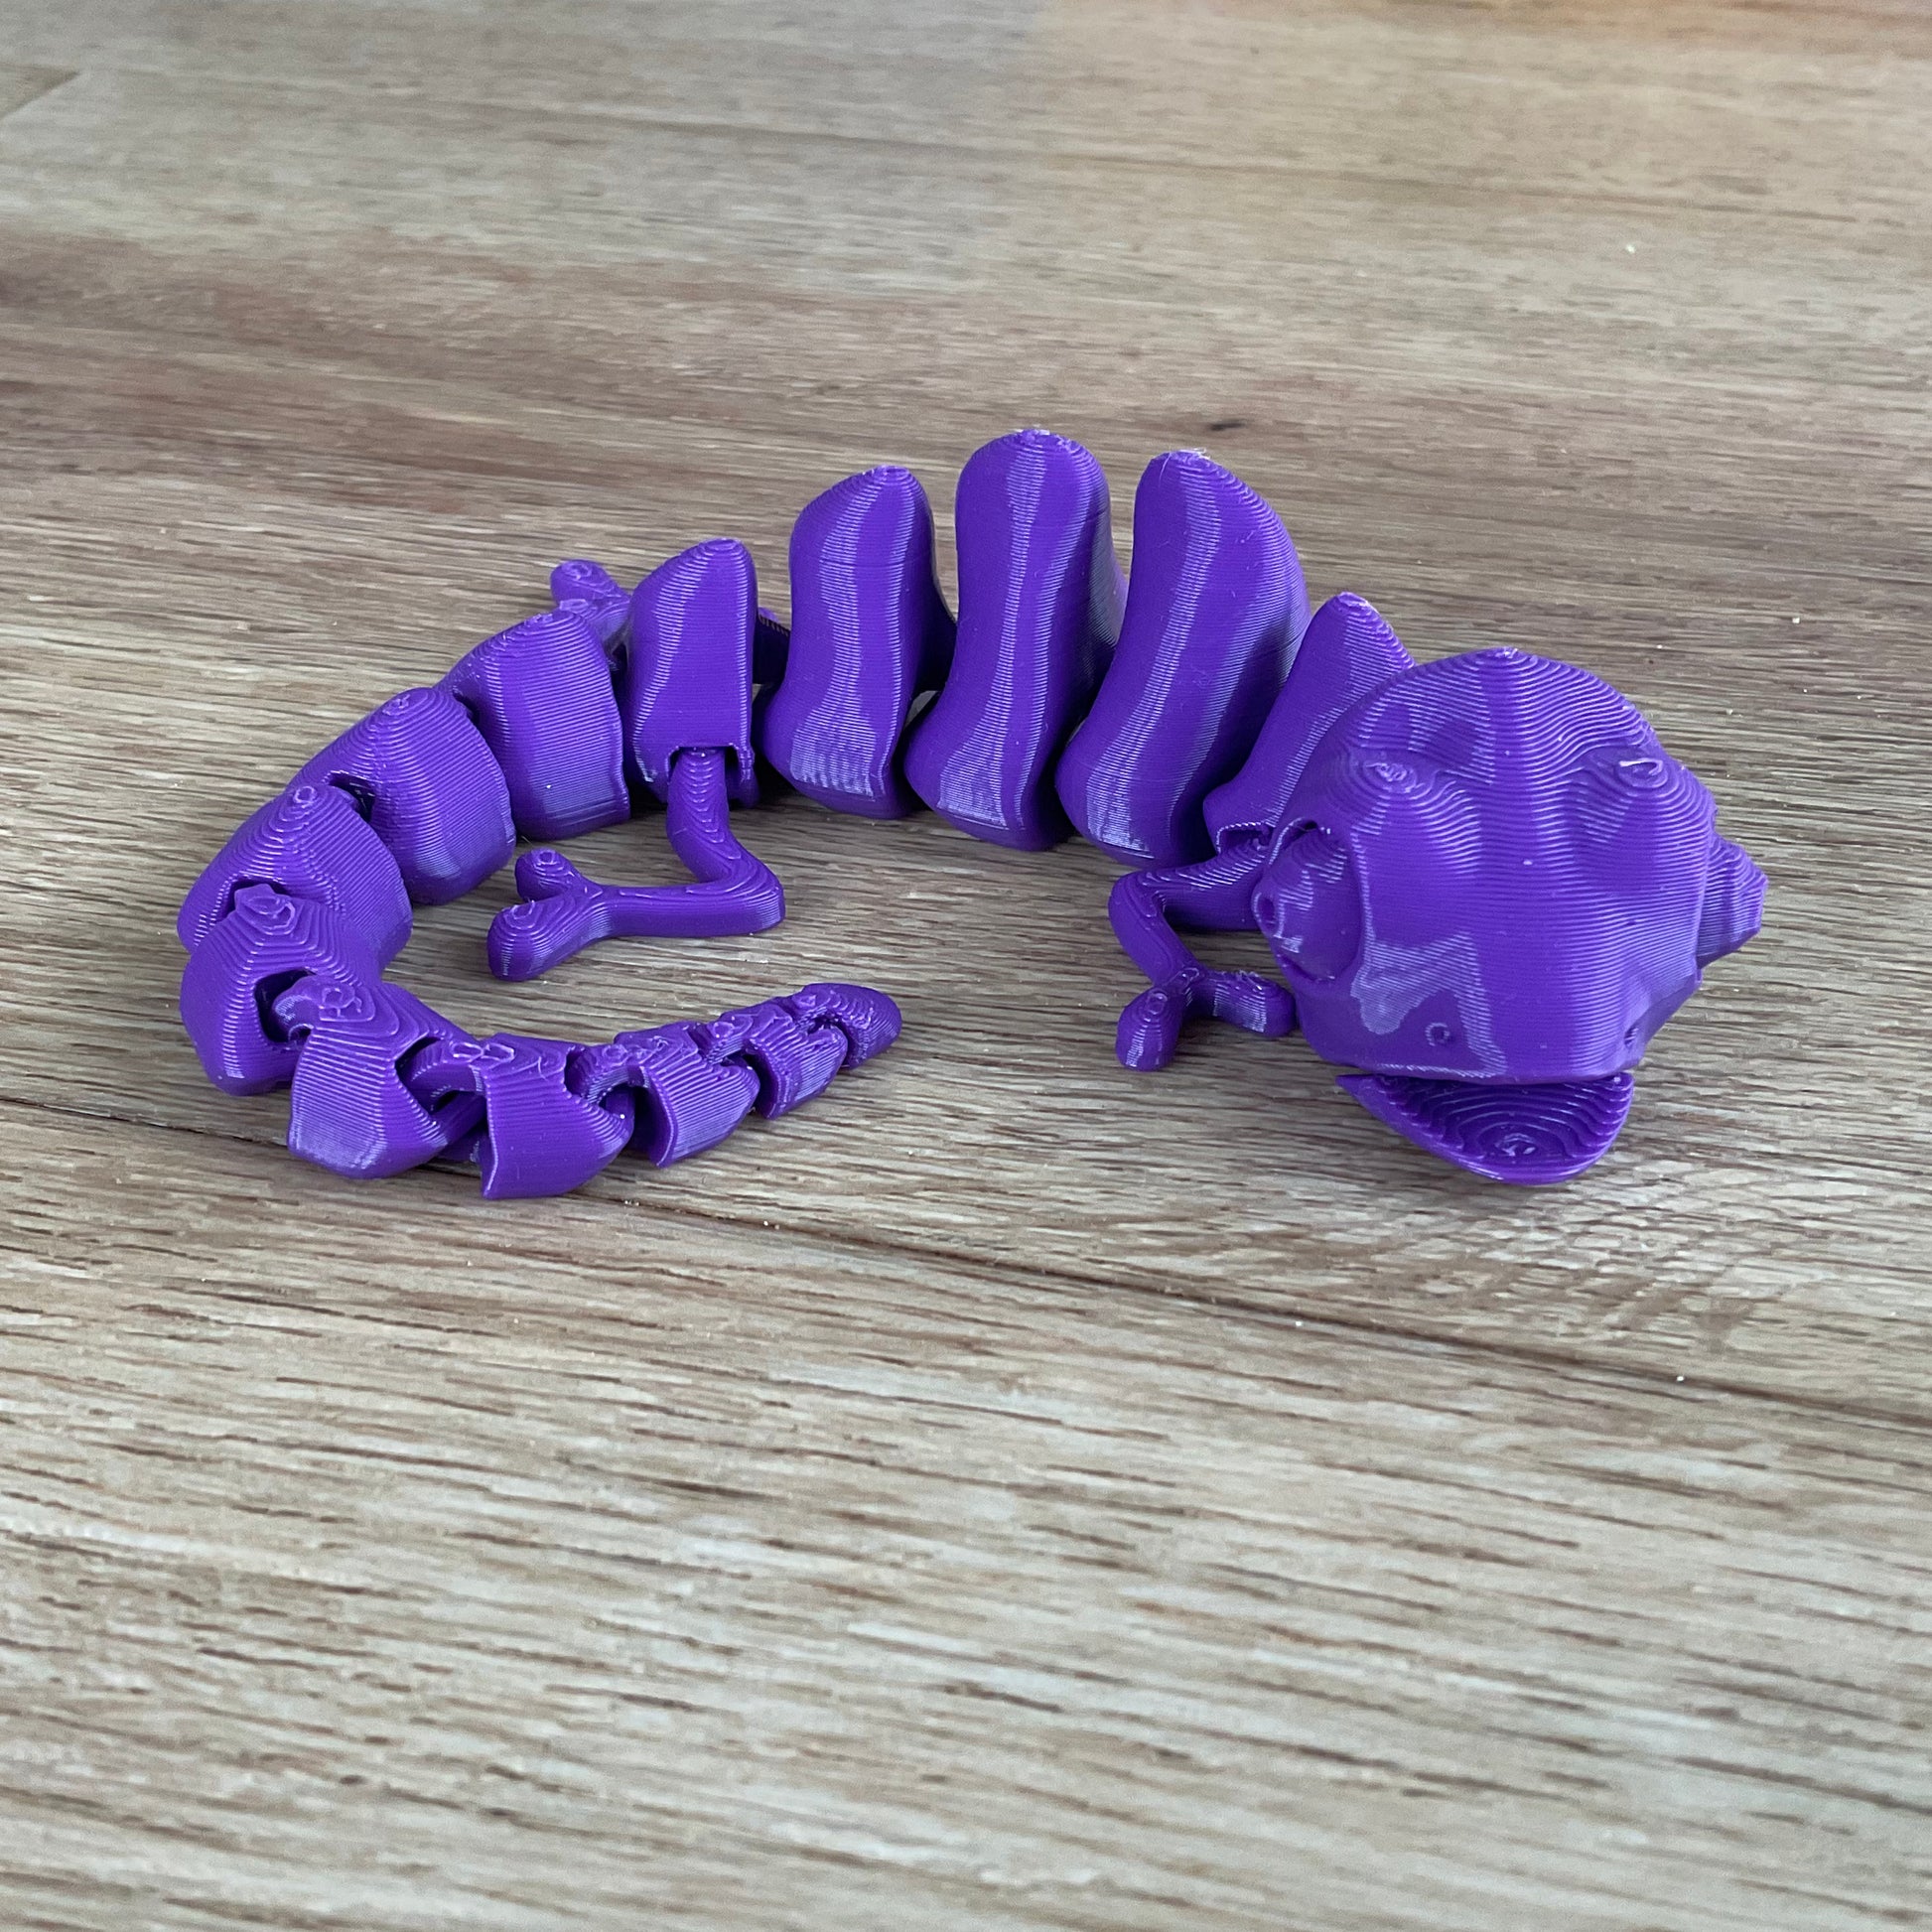 a picture of the chameleon fidget toy in purple.